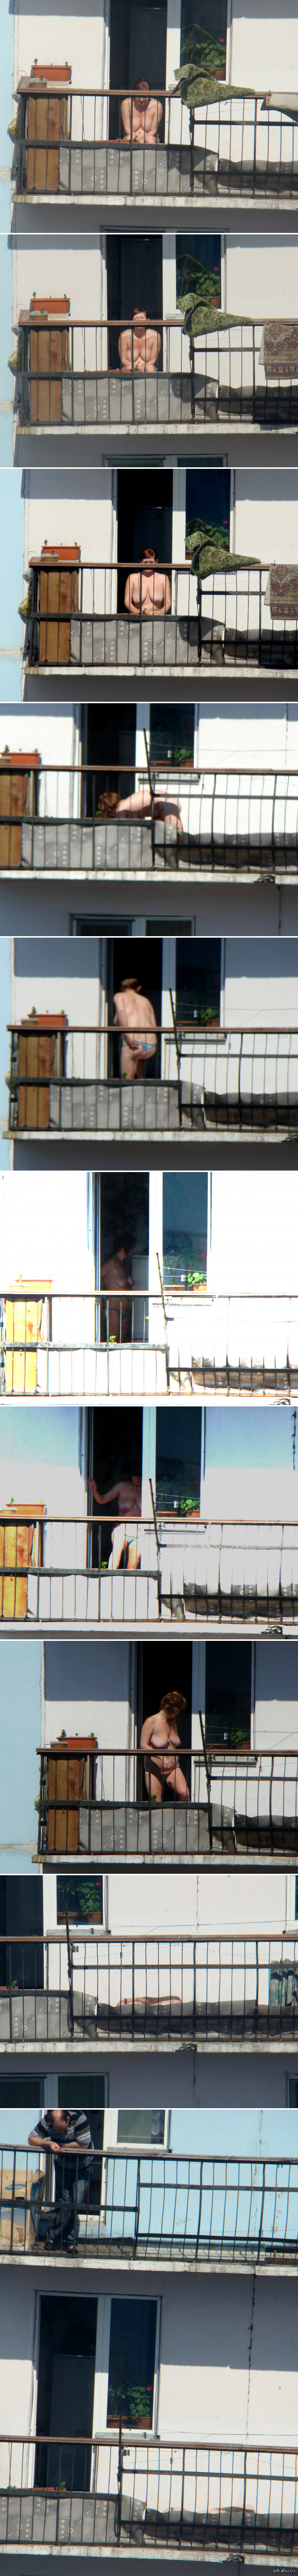 Summer has passed, the pictures remain ... - NSFW, My, Boobs, MILF, Voyeurism, Summer, View from the window, Neighbours, Longpost